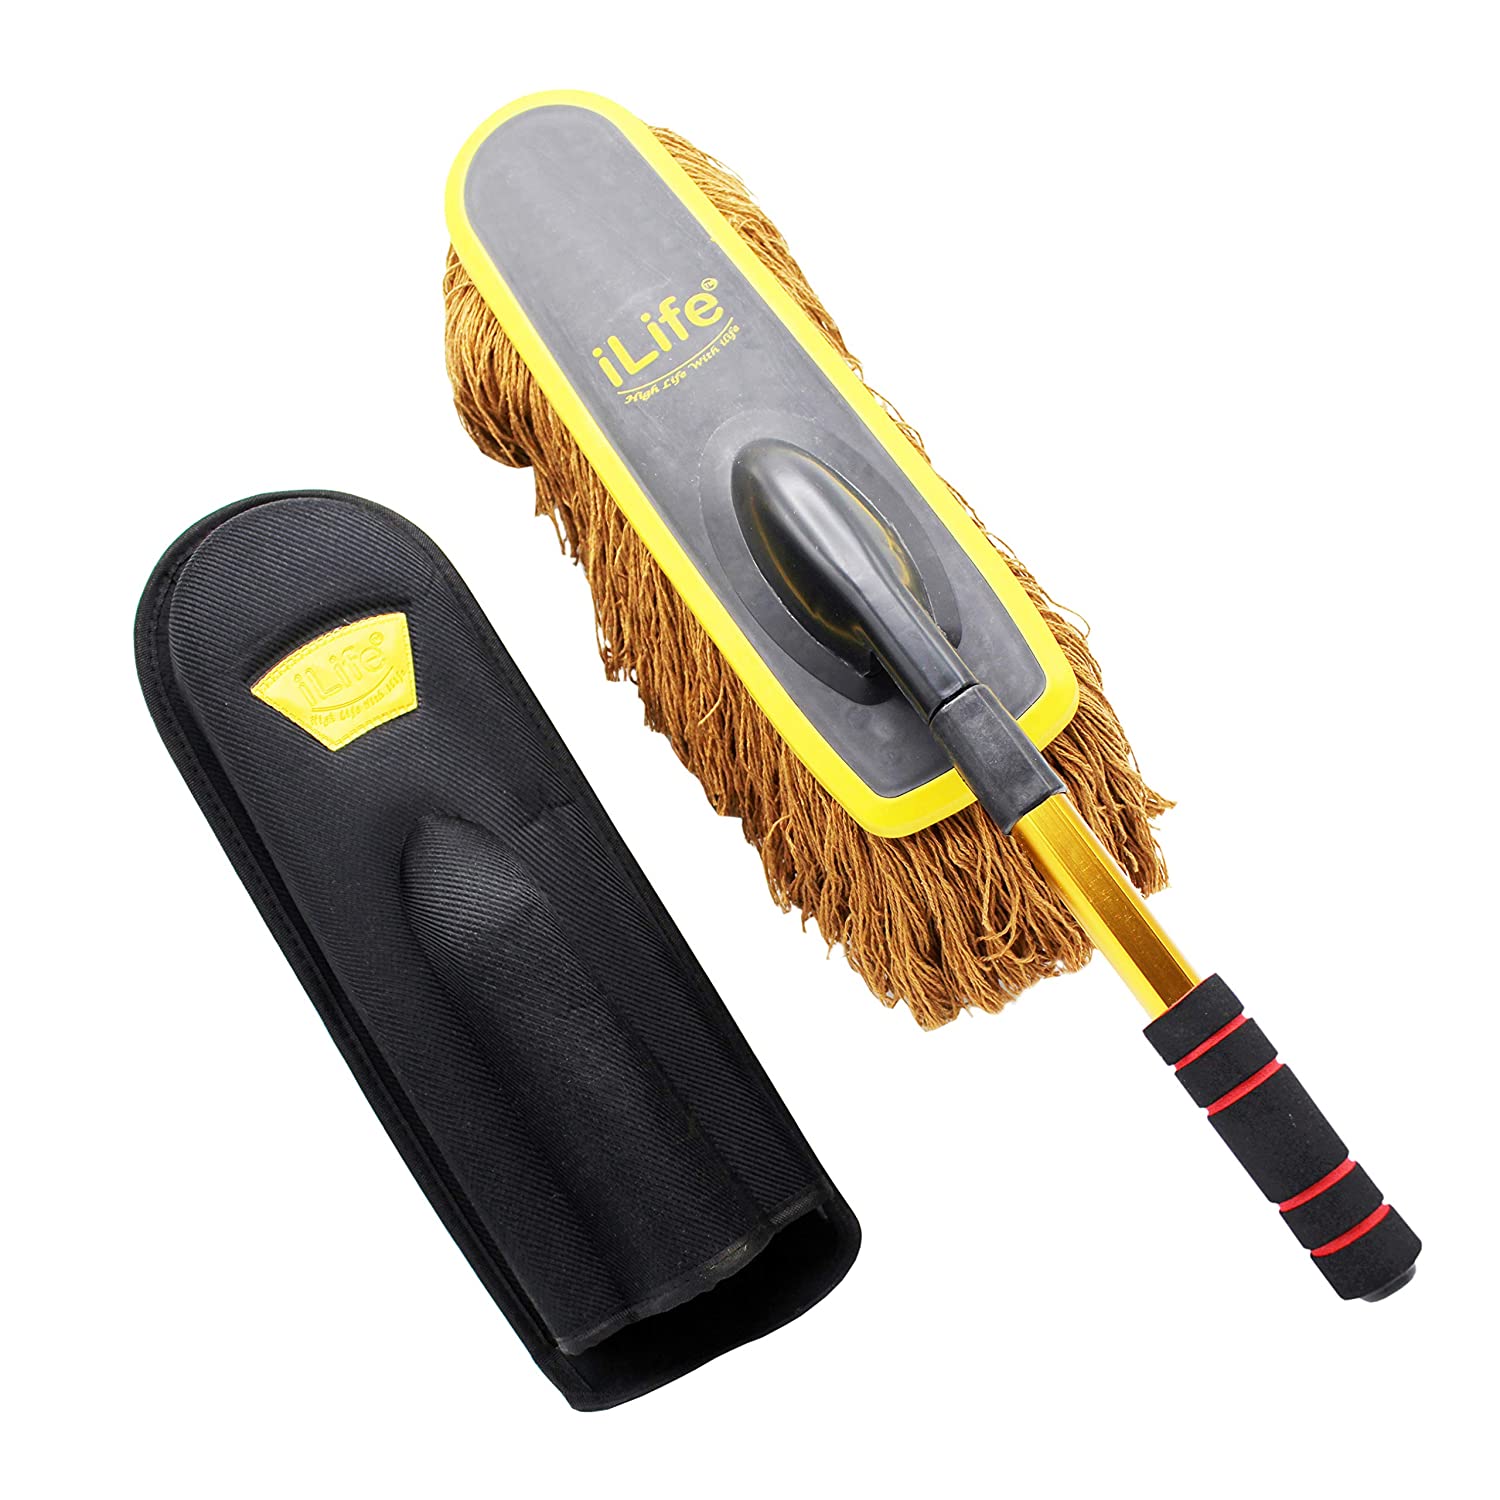 iLife Super Soft Microfiber Car Dash Duster Brush for Car Cleaning Home Kitchen Computer Cleaning Brush Dusting Tool with Case (Yellow)